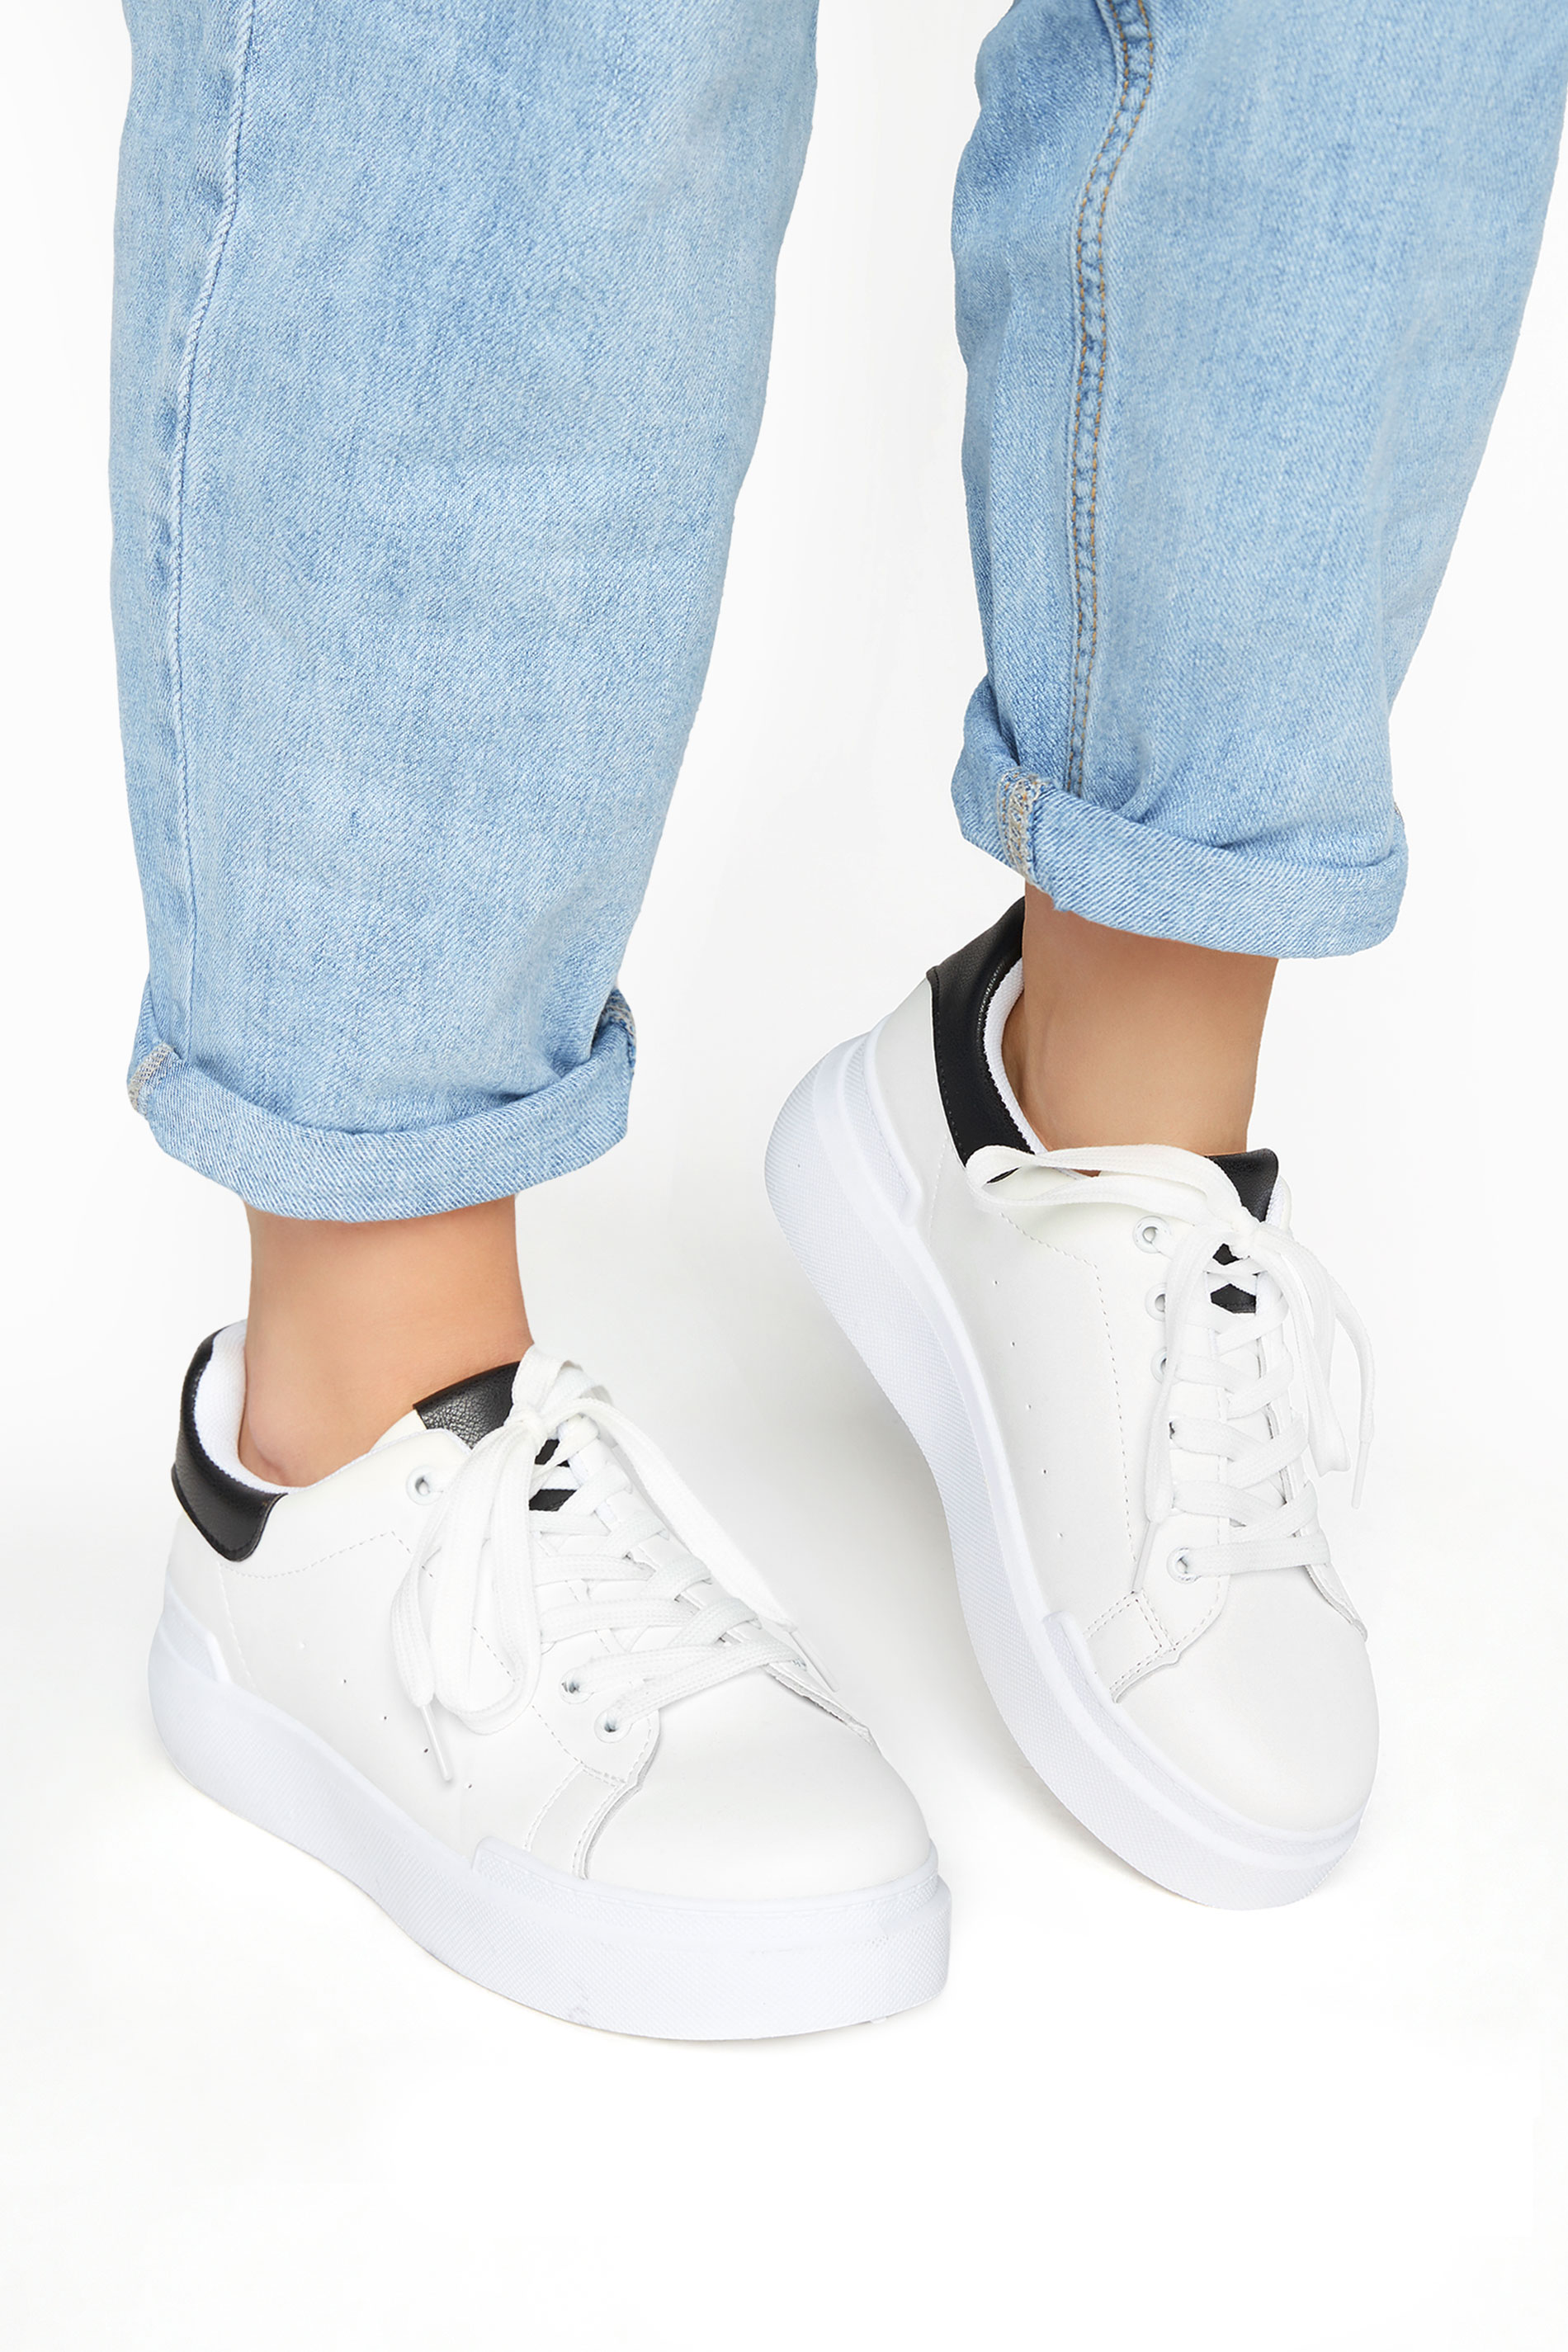 LIMITED COLLECTION White and Black Flatform Trainer In Wide Fit | Yours Clothing 1